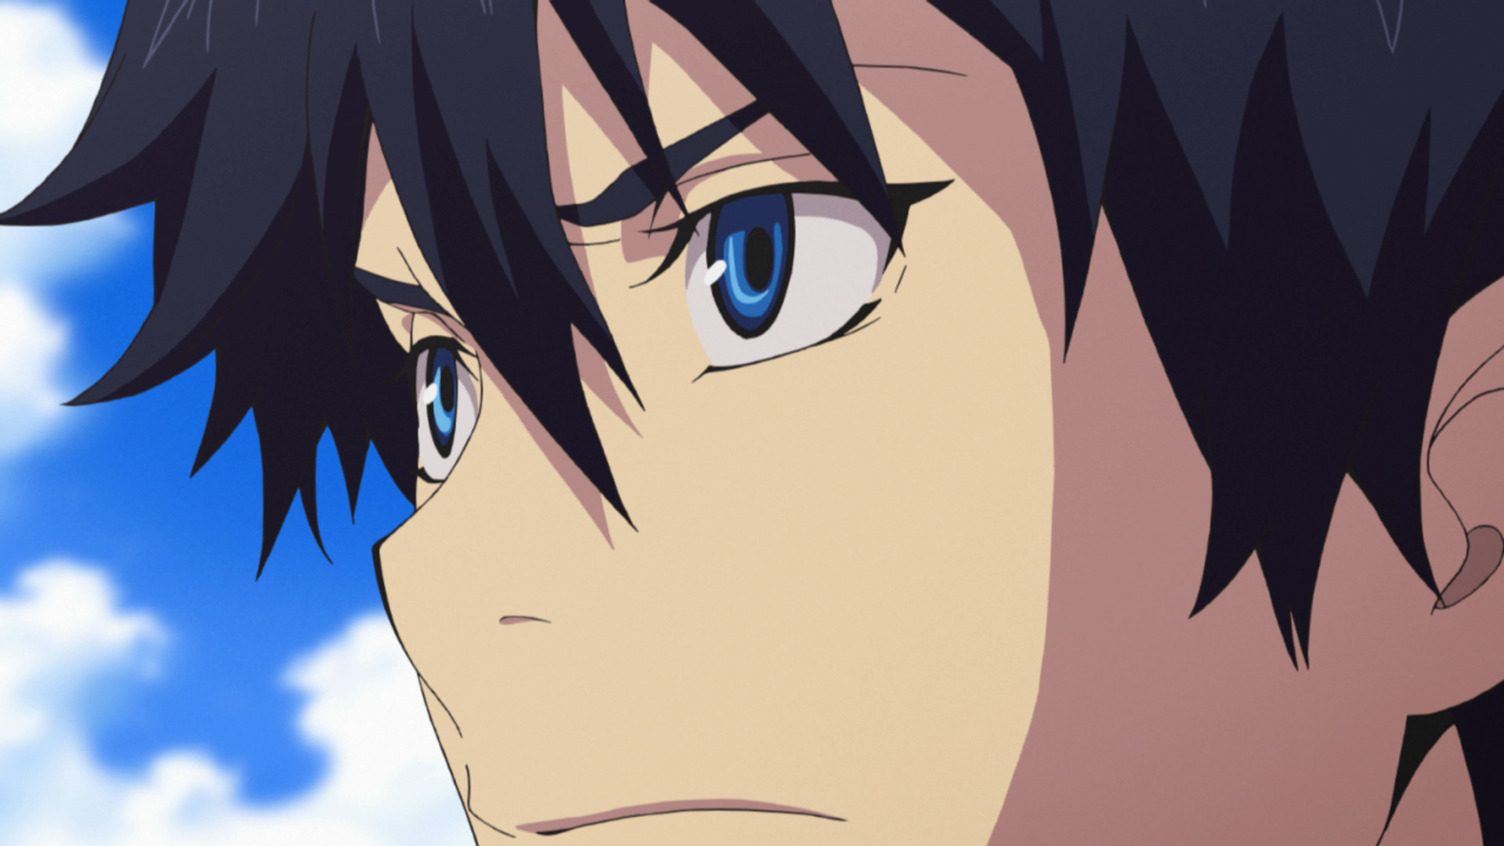 6. "Rin Okumura from Blue Exorcist" - wide 6